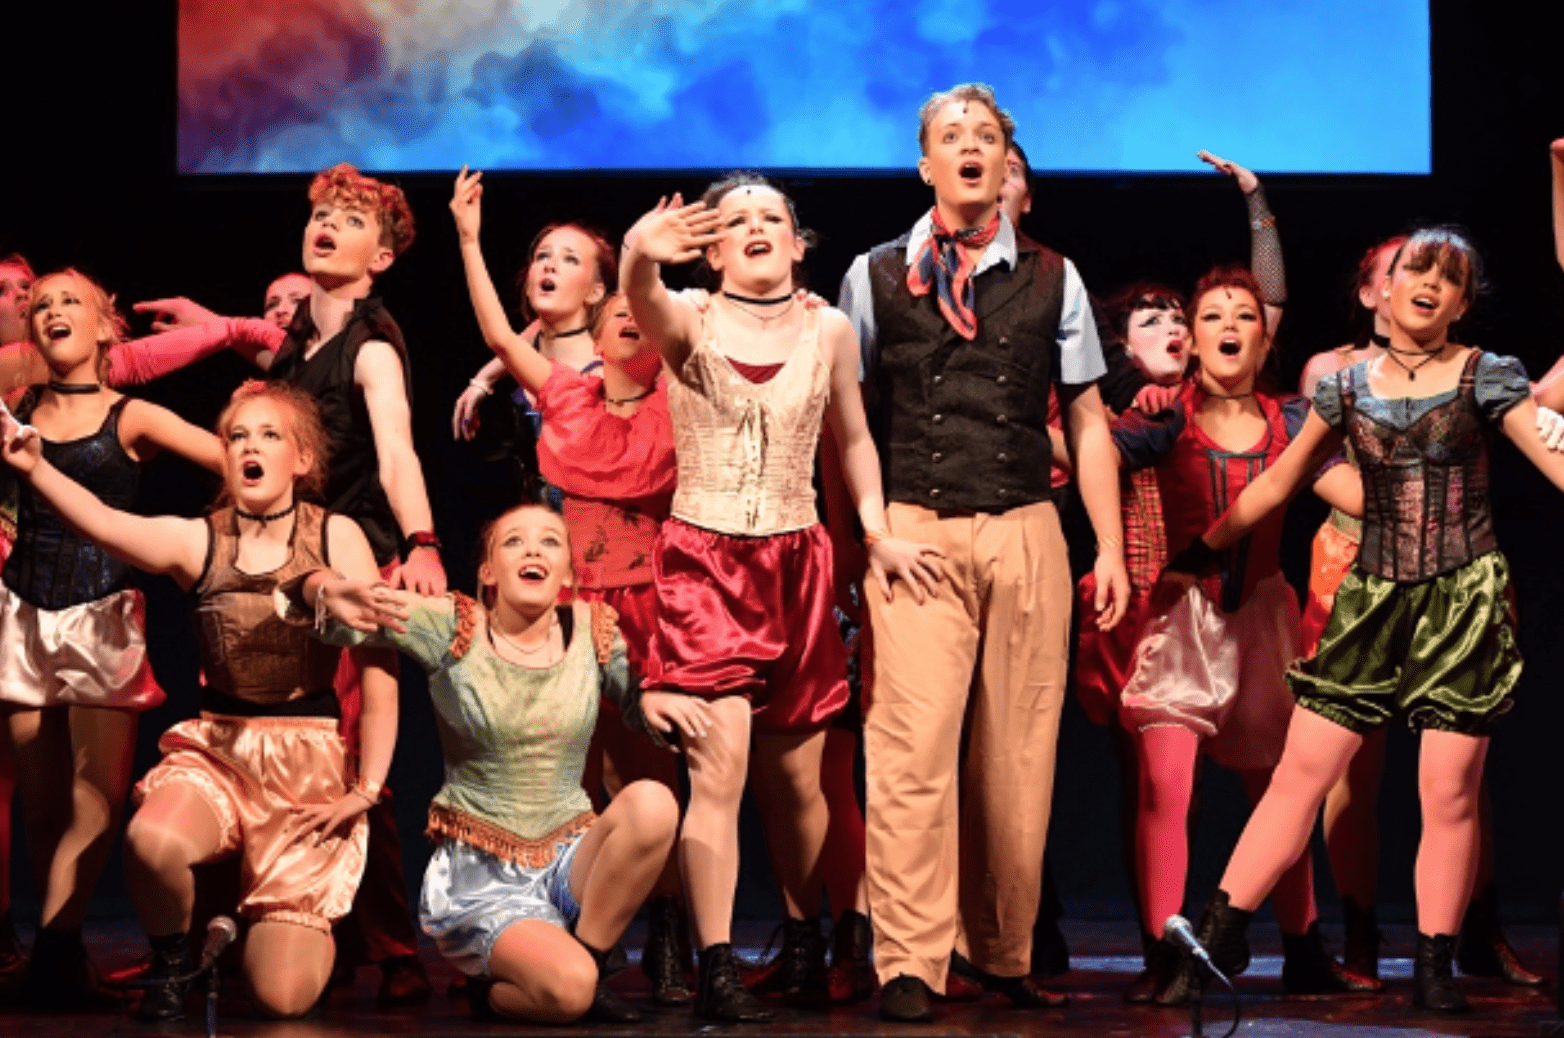 Gifted students from Stagecoach Performing Arts schools grace iconic West End stage of Shaftesbury Theatre